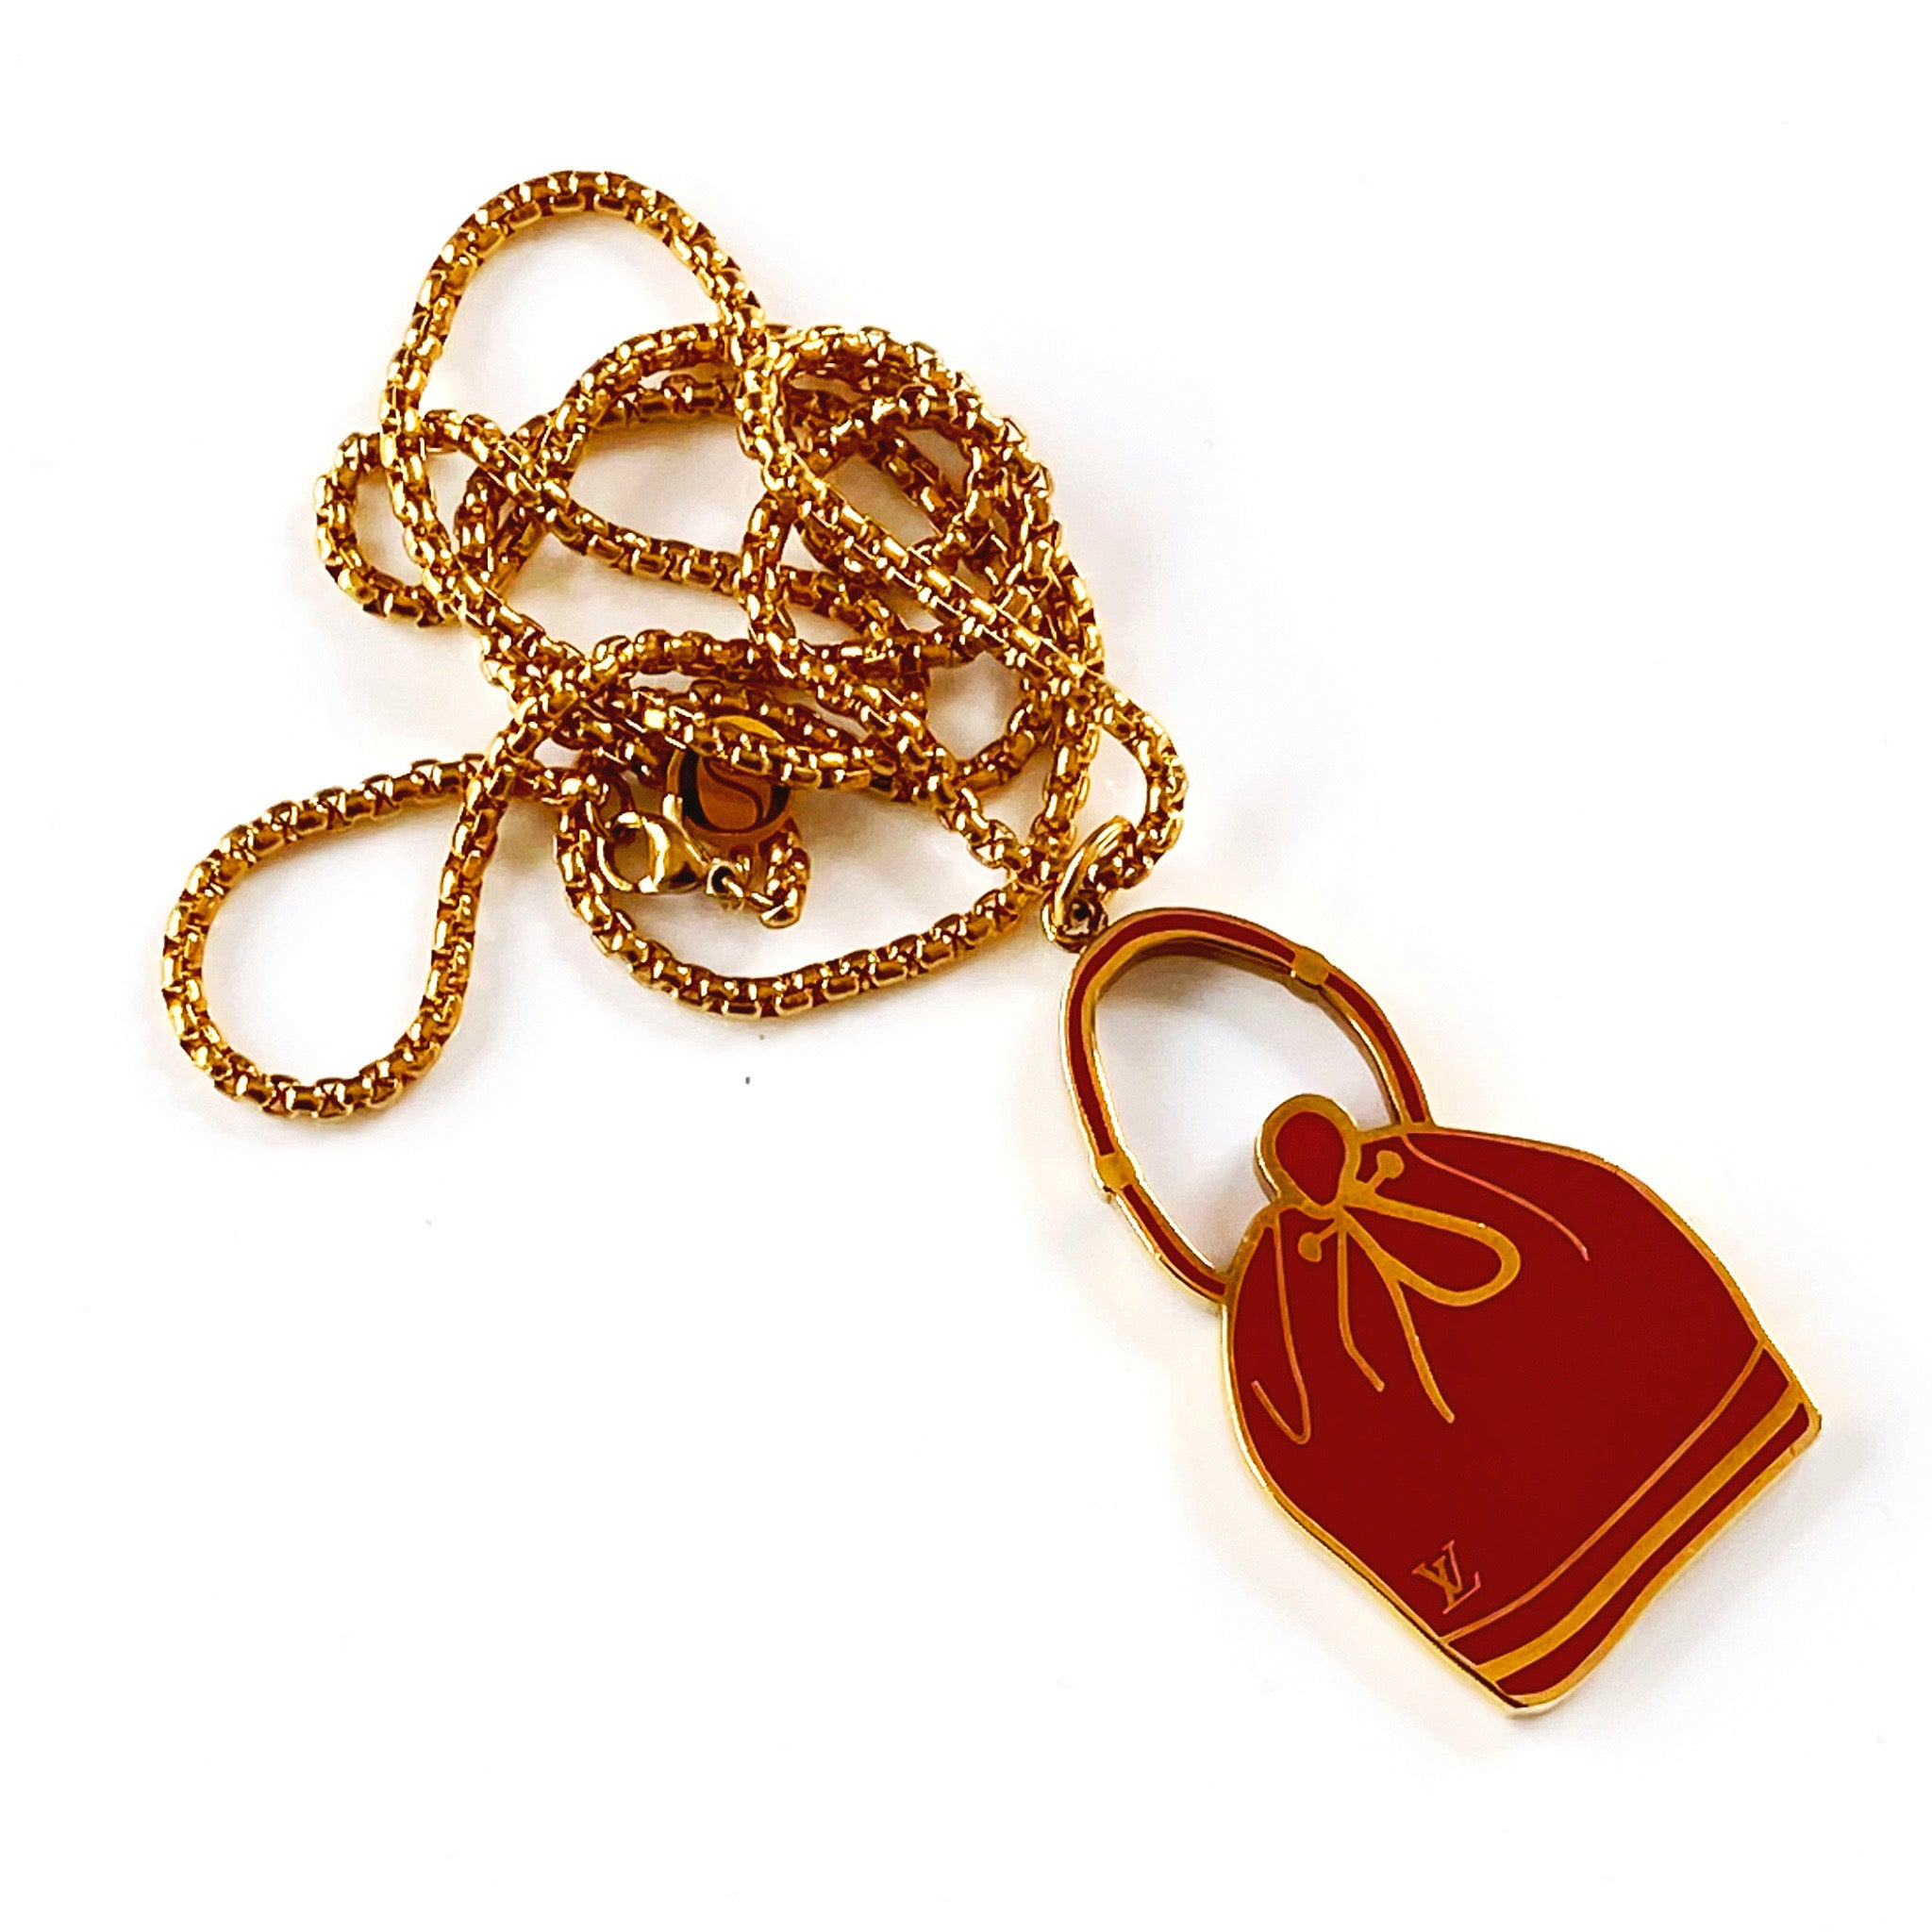 Red and Gold Louis Vuitton Purse Charm Necklace